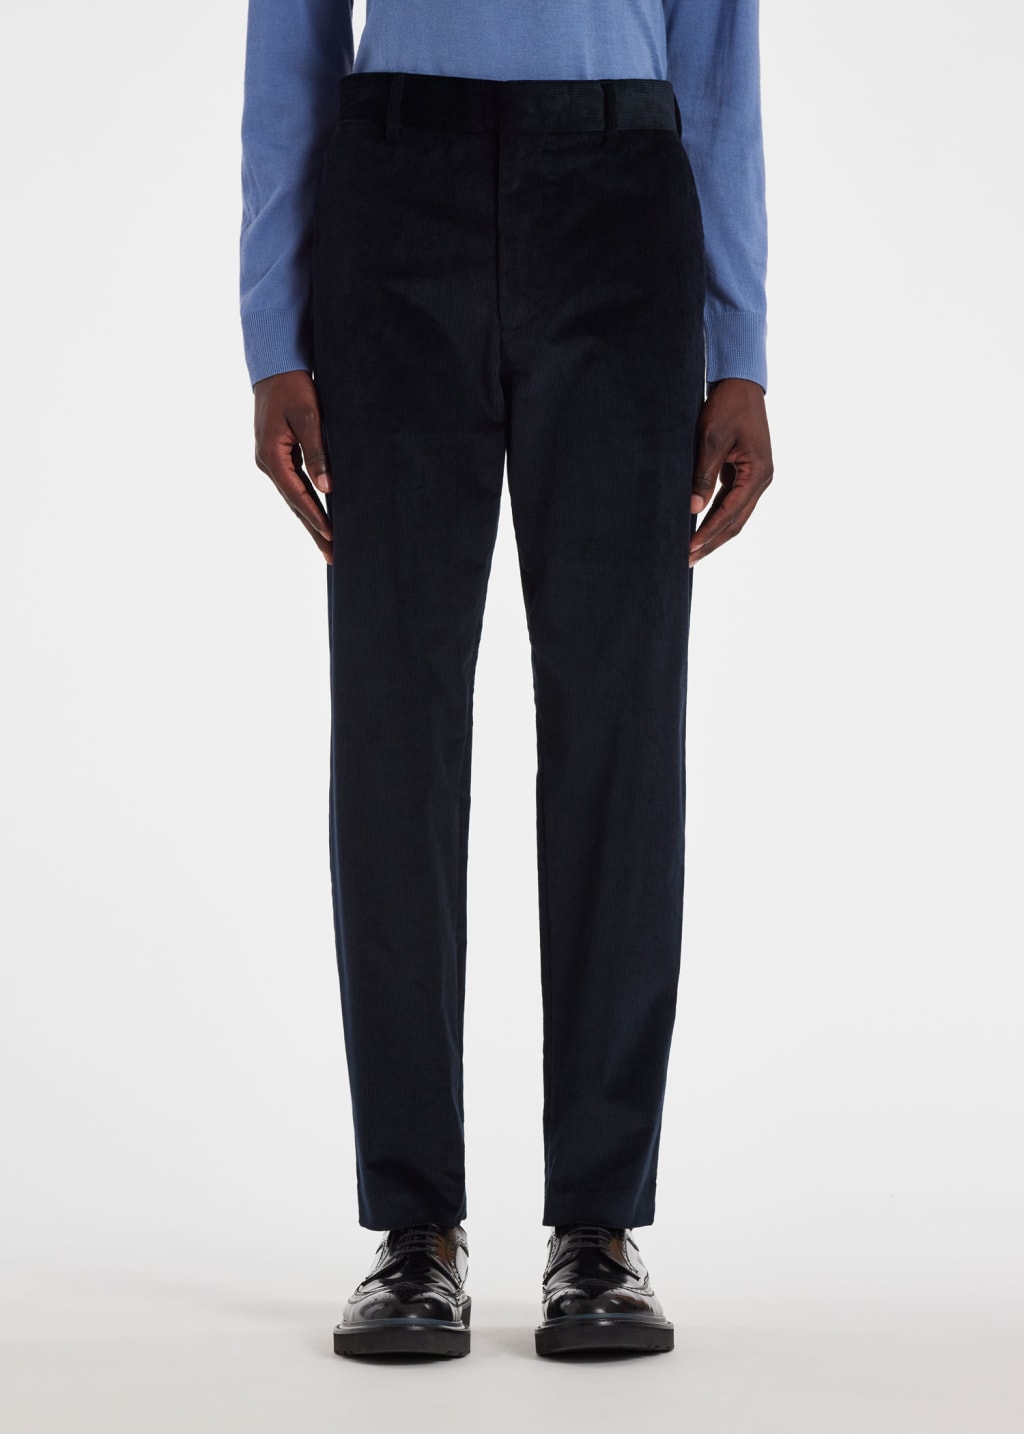 Product View - Tapered-Fit Navy Corduroy Cotton Trousers by Paul Smith